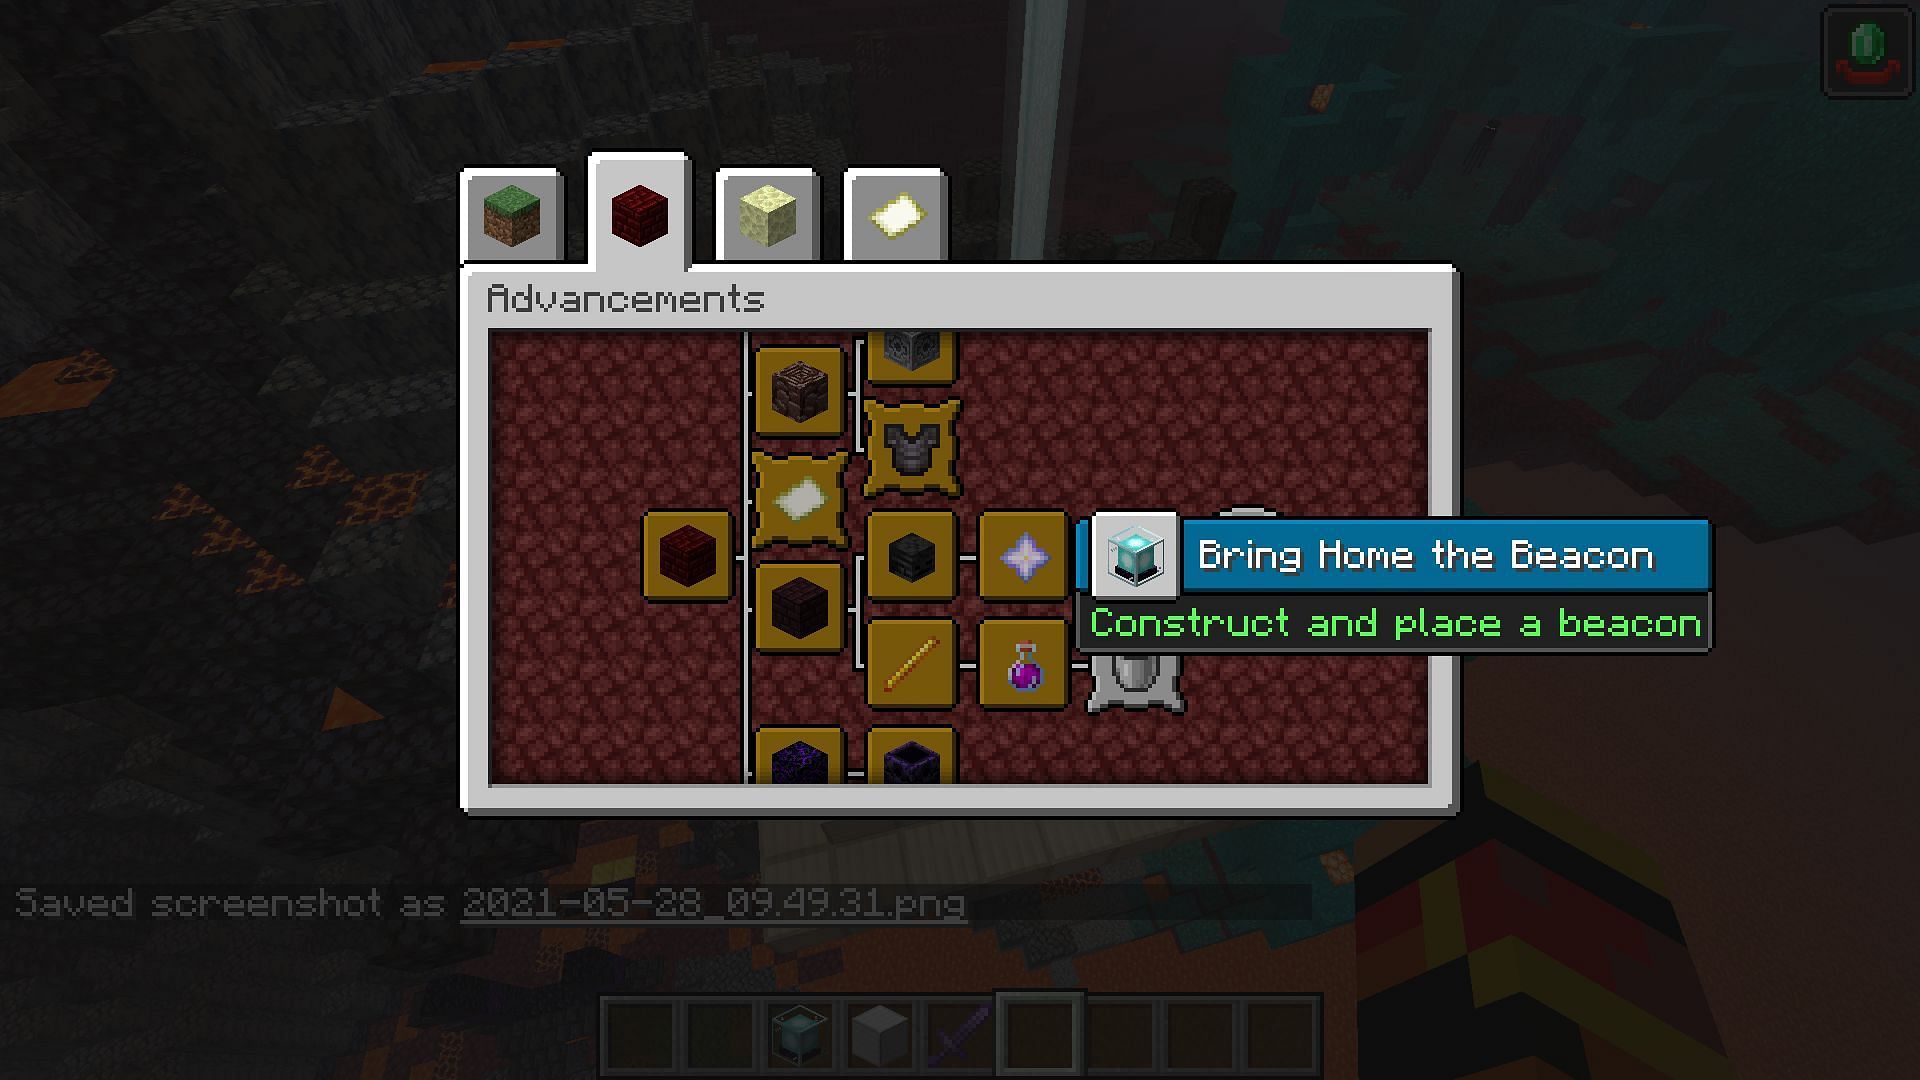 Part of the advancement branch for Nether (Image via Minecraft)